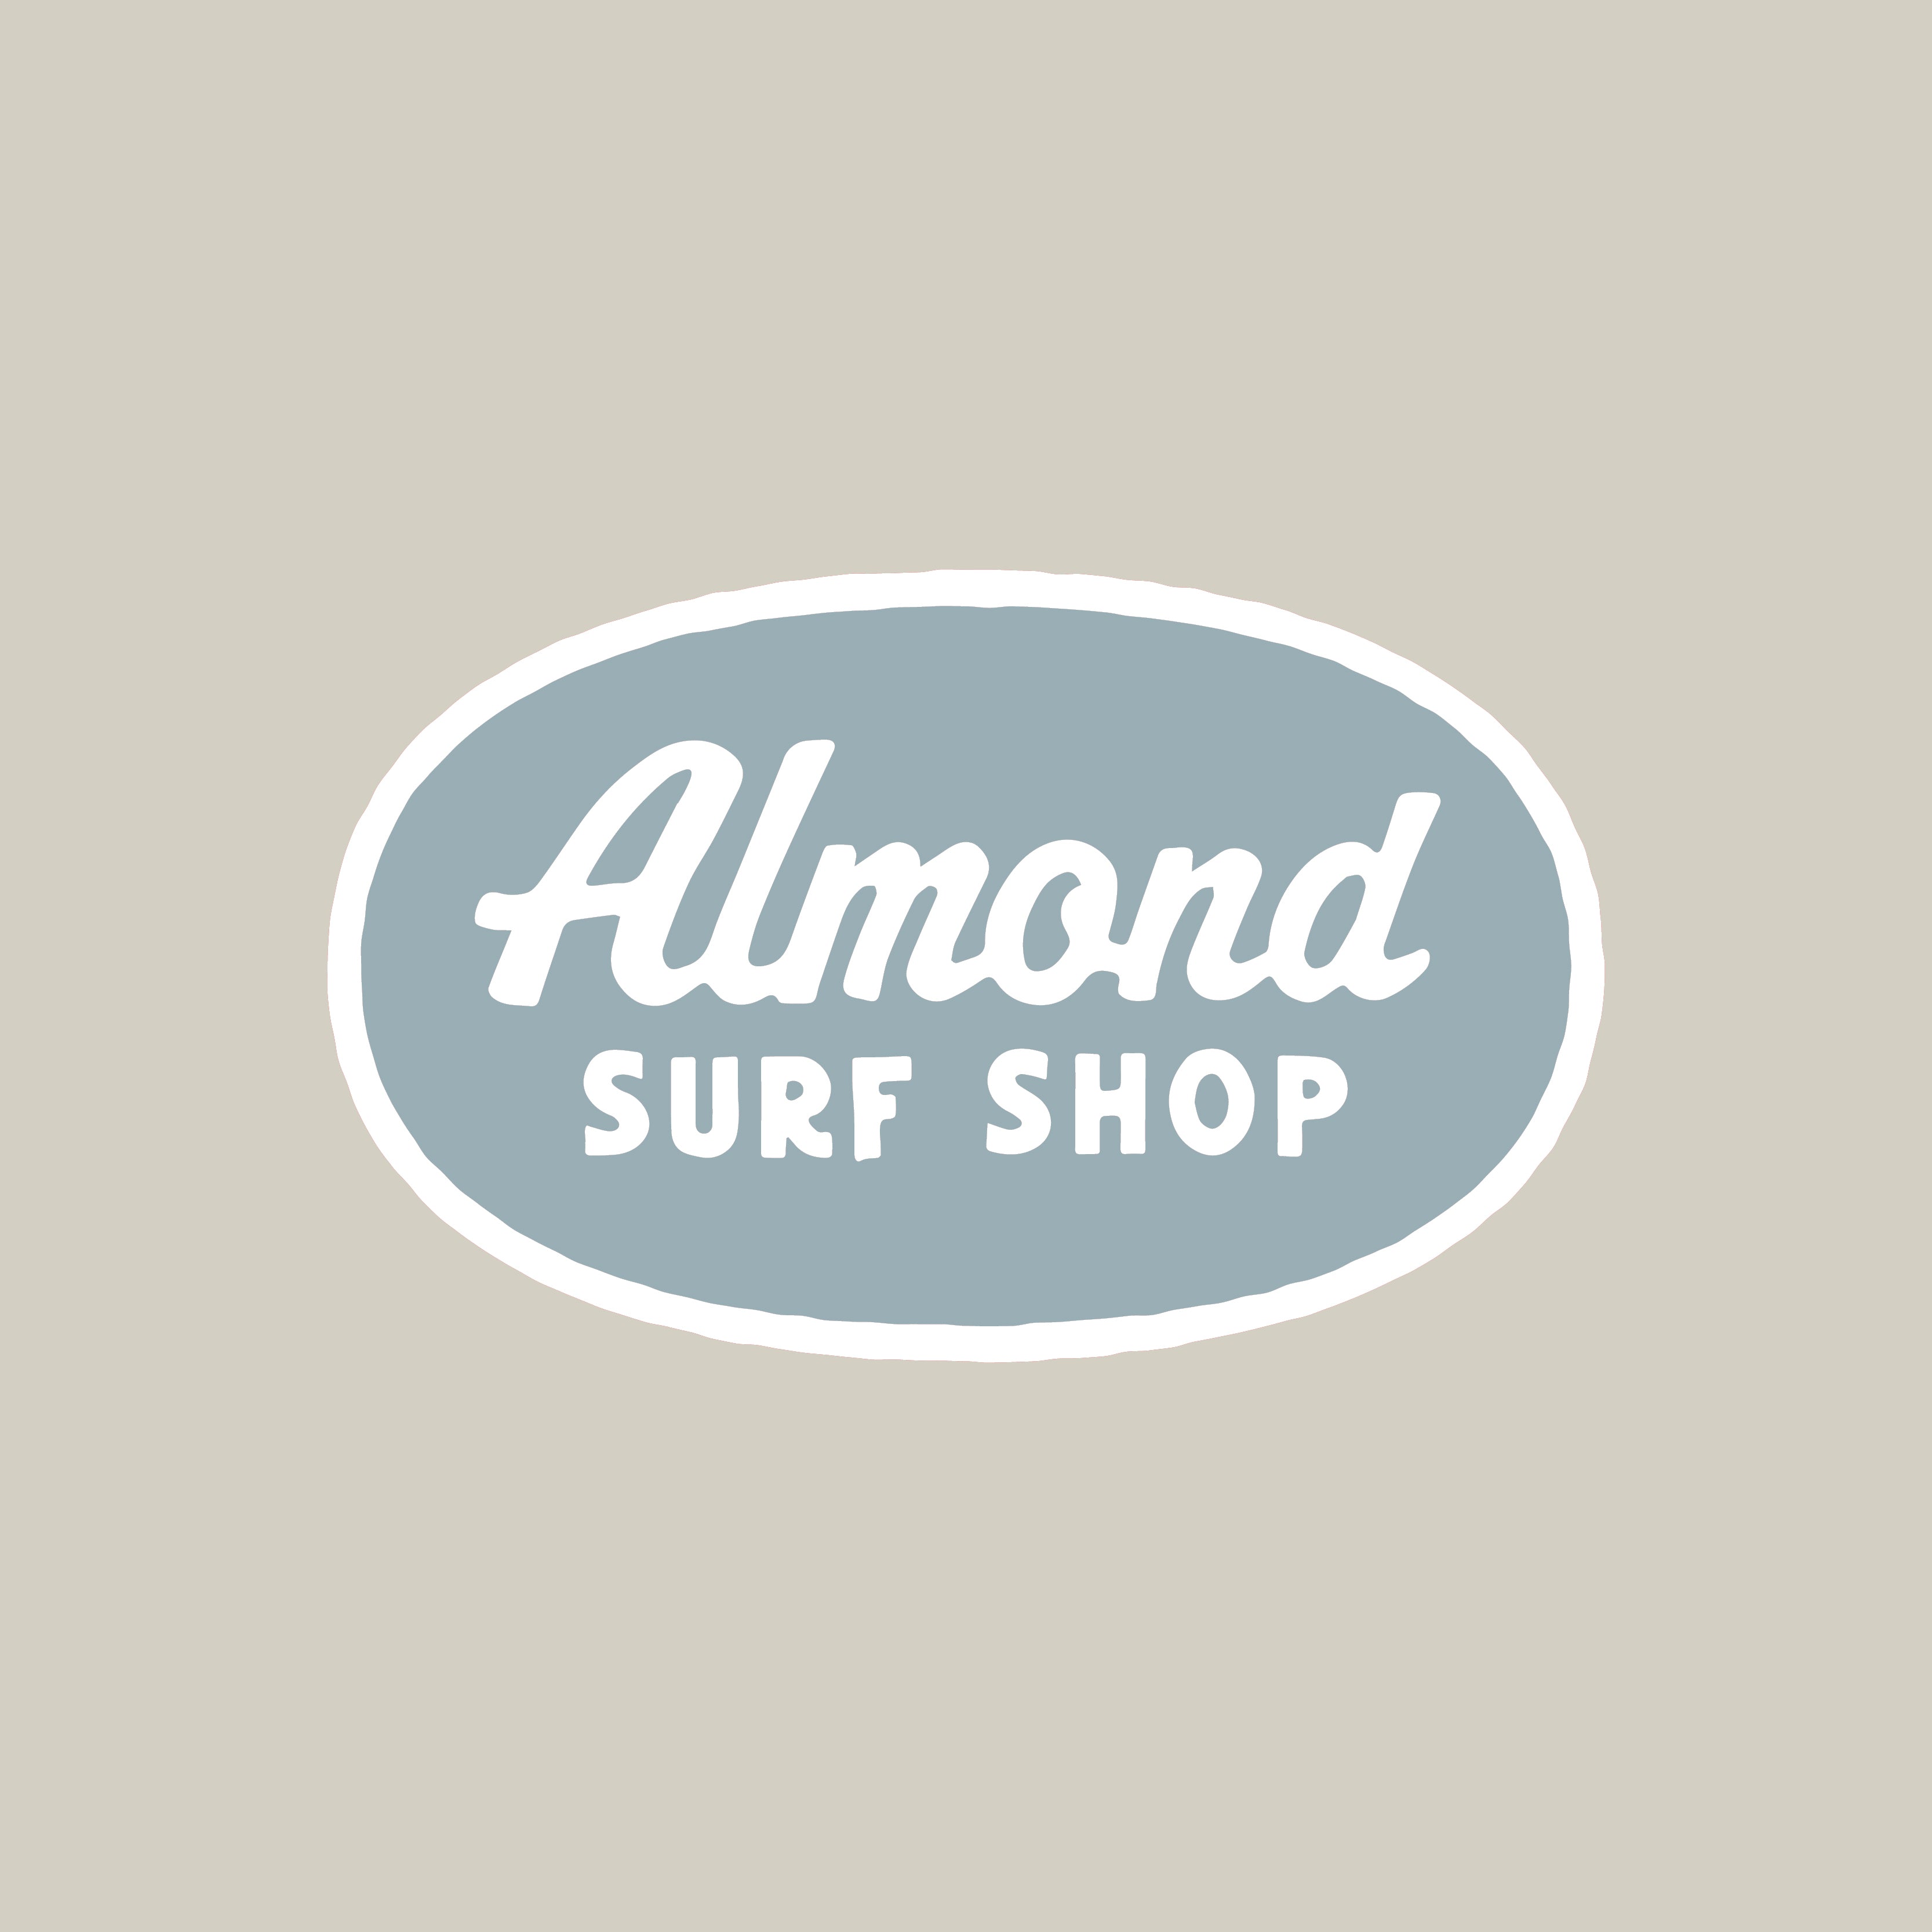 Origin of the name: Almond Surfboards